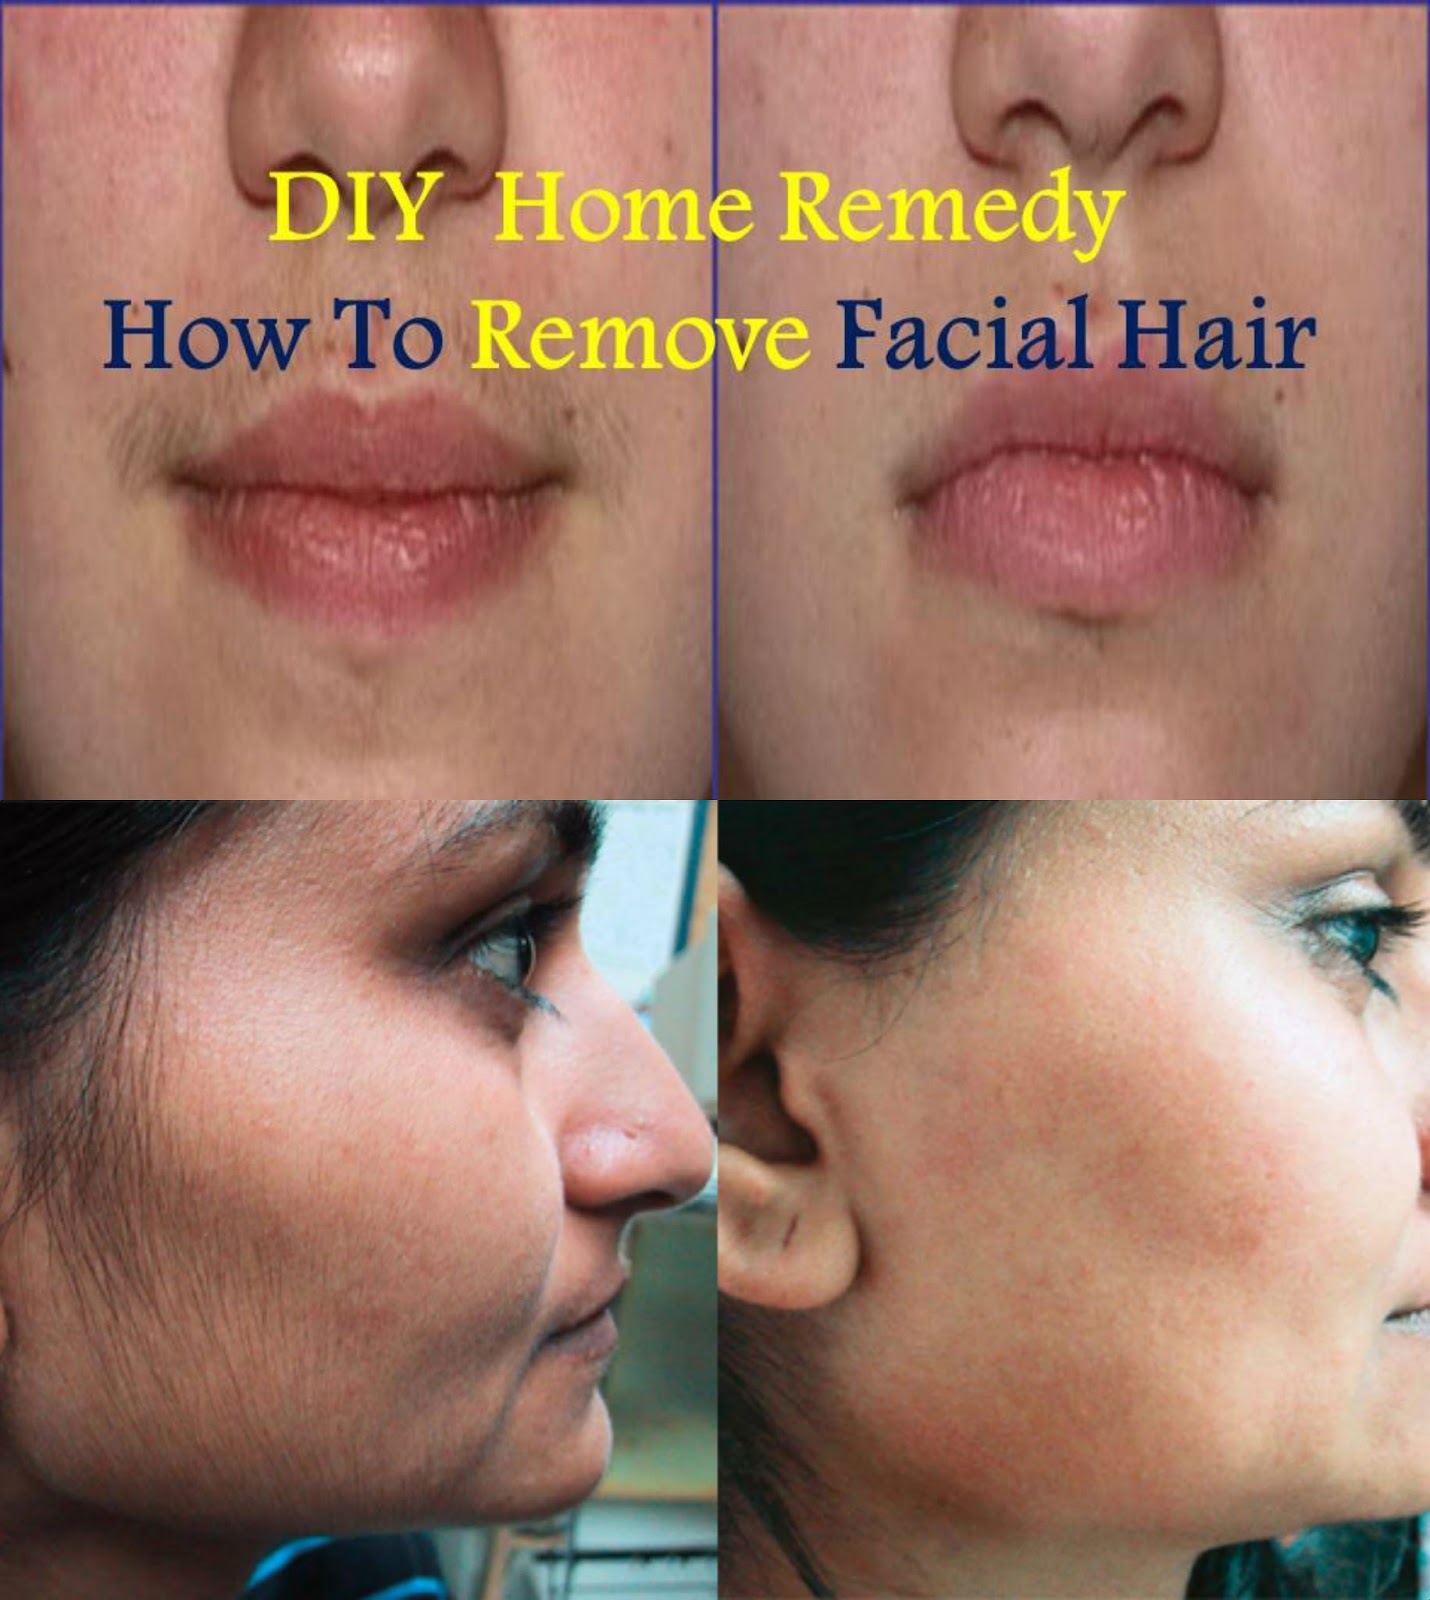 What are some home remedies to remove facial hair?